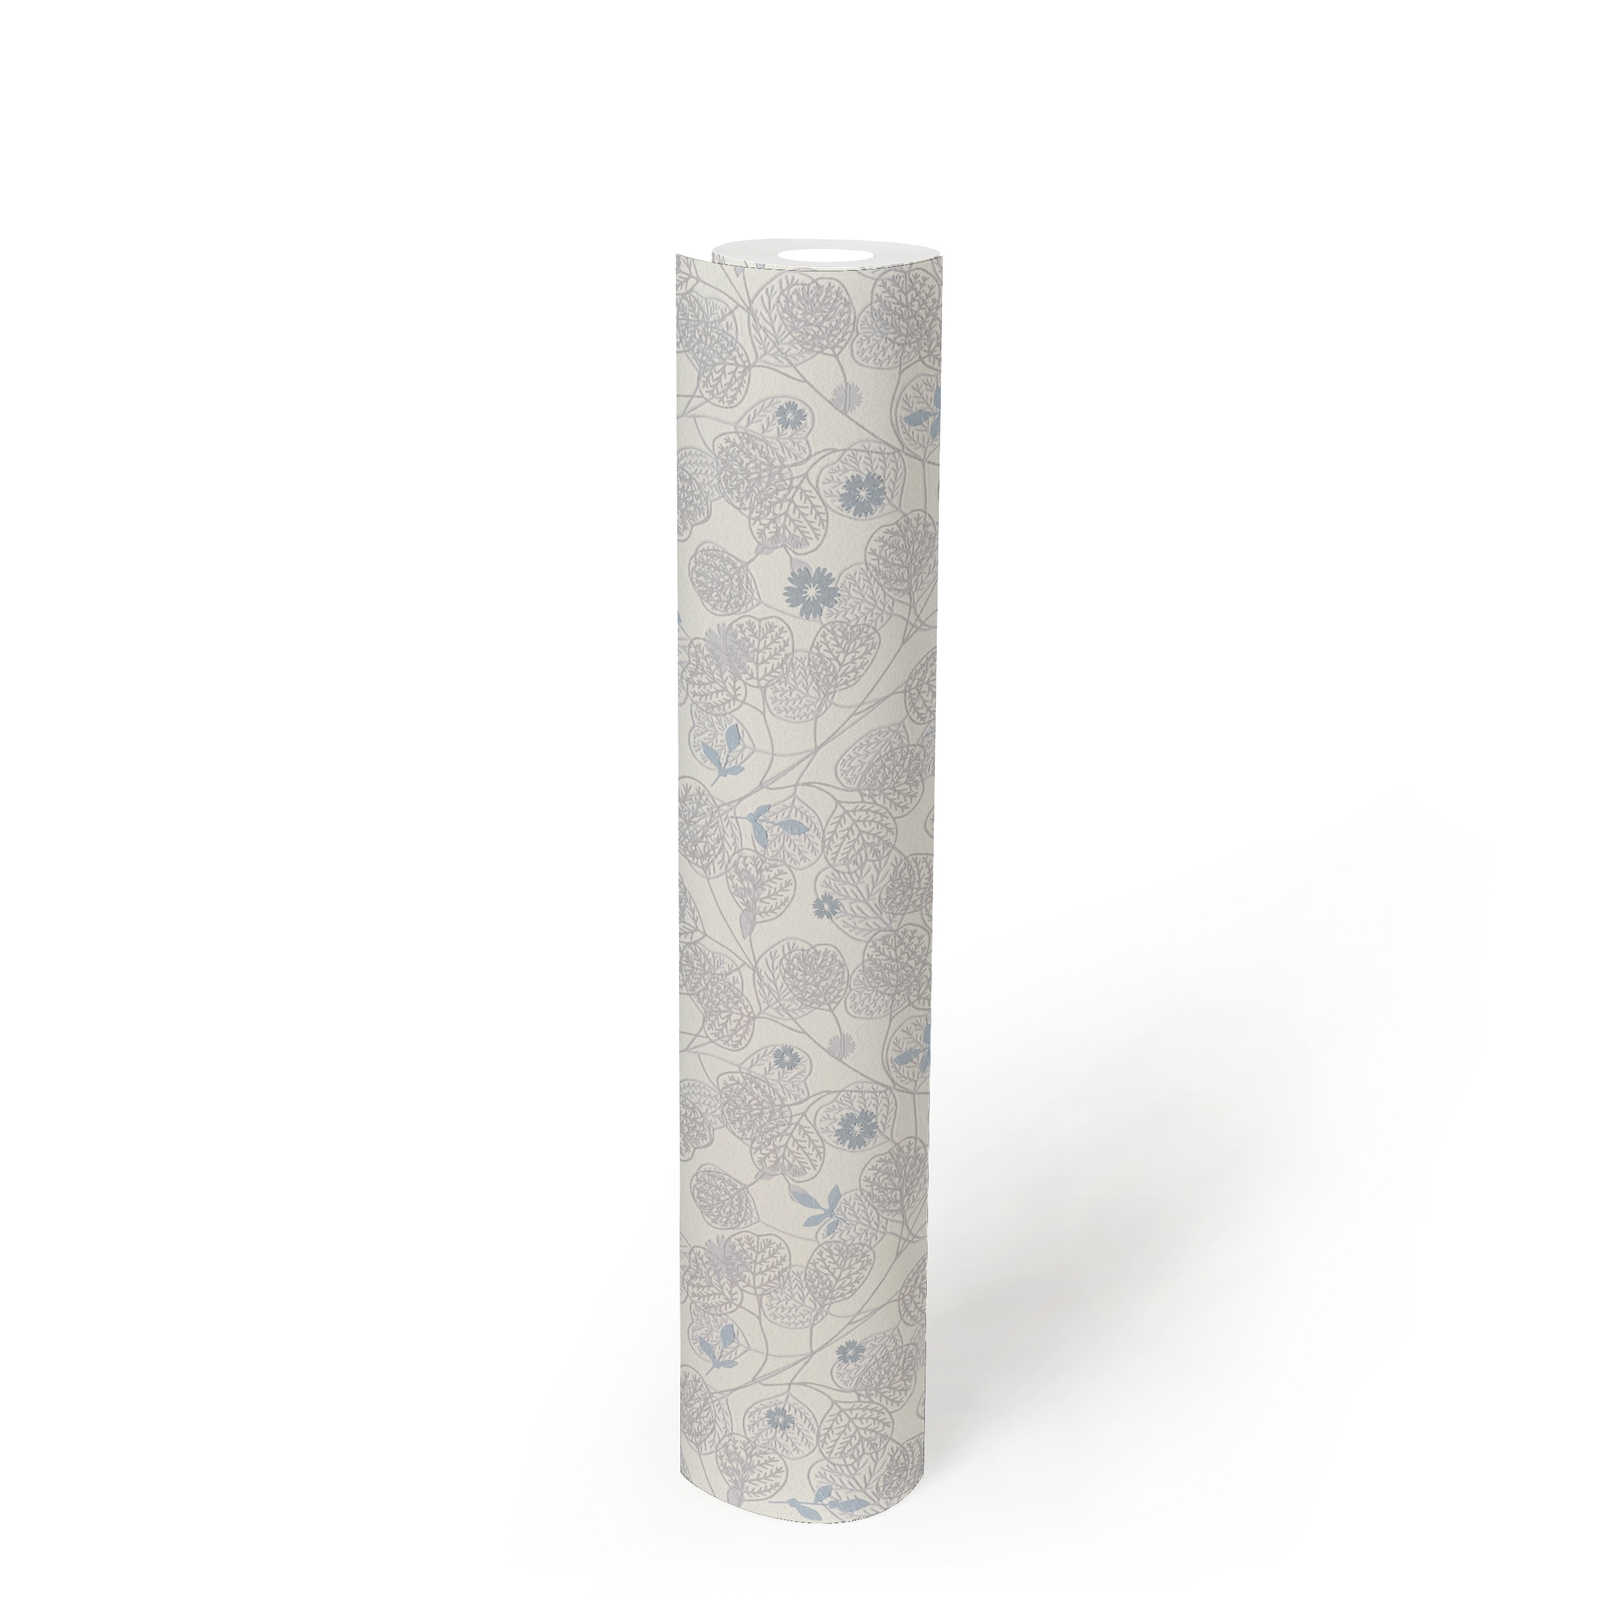             Floral wallpaper with subtle flowers & leaves - white, grey, blue
        